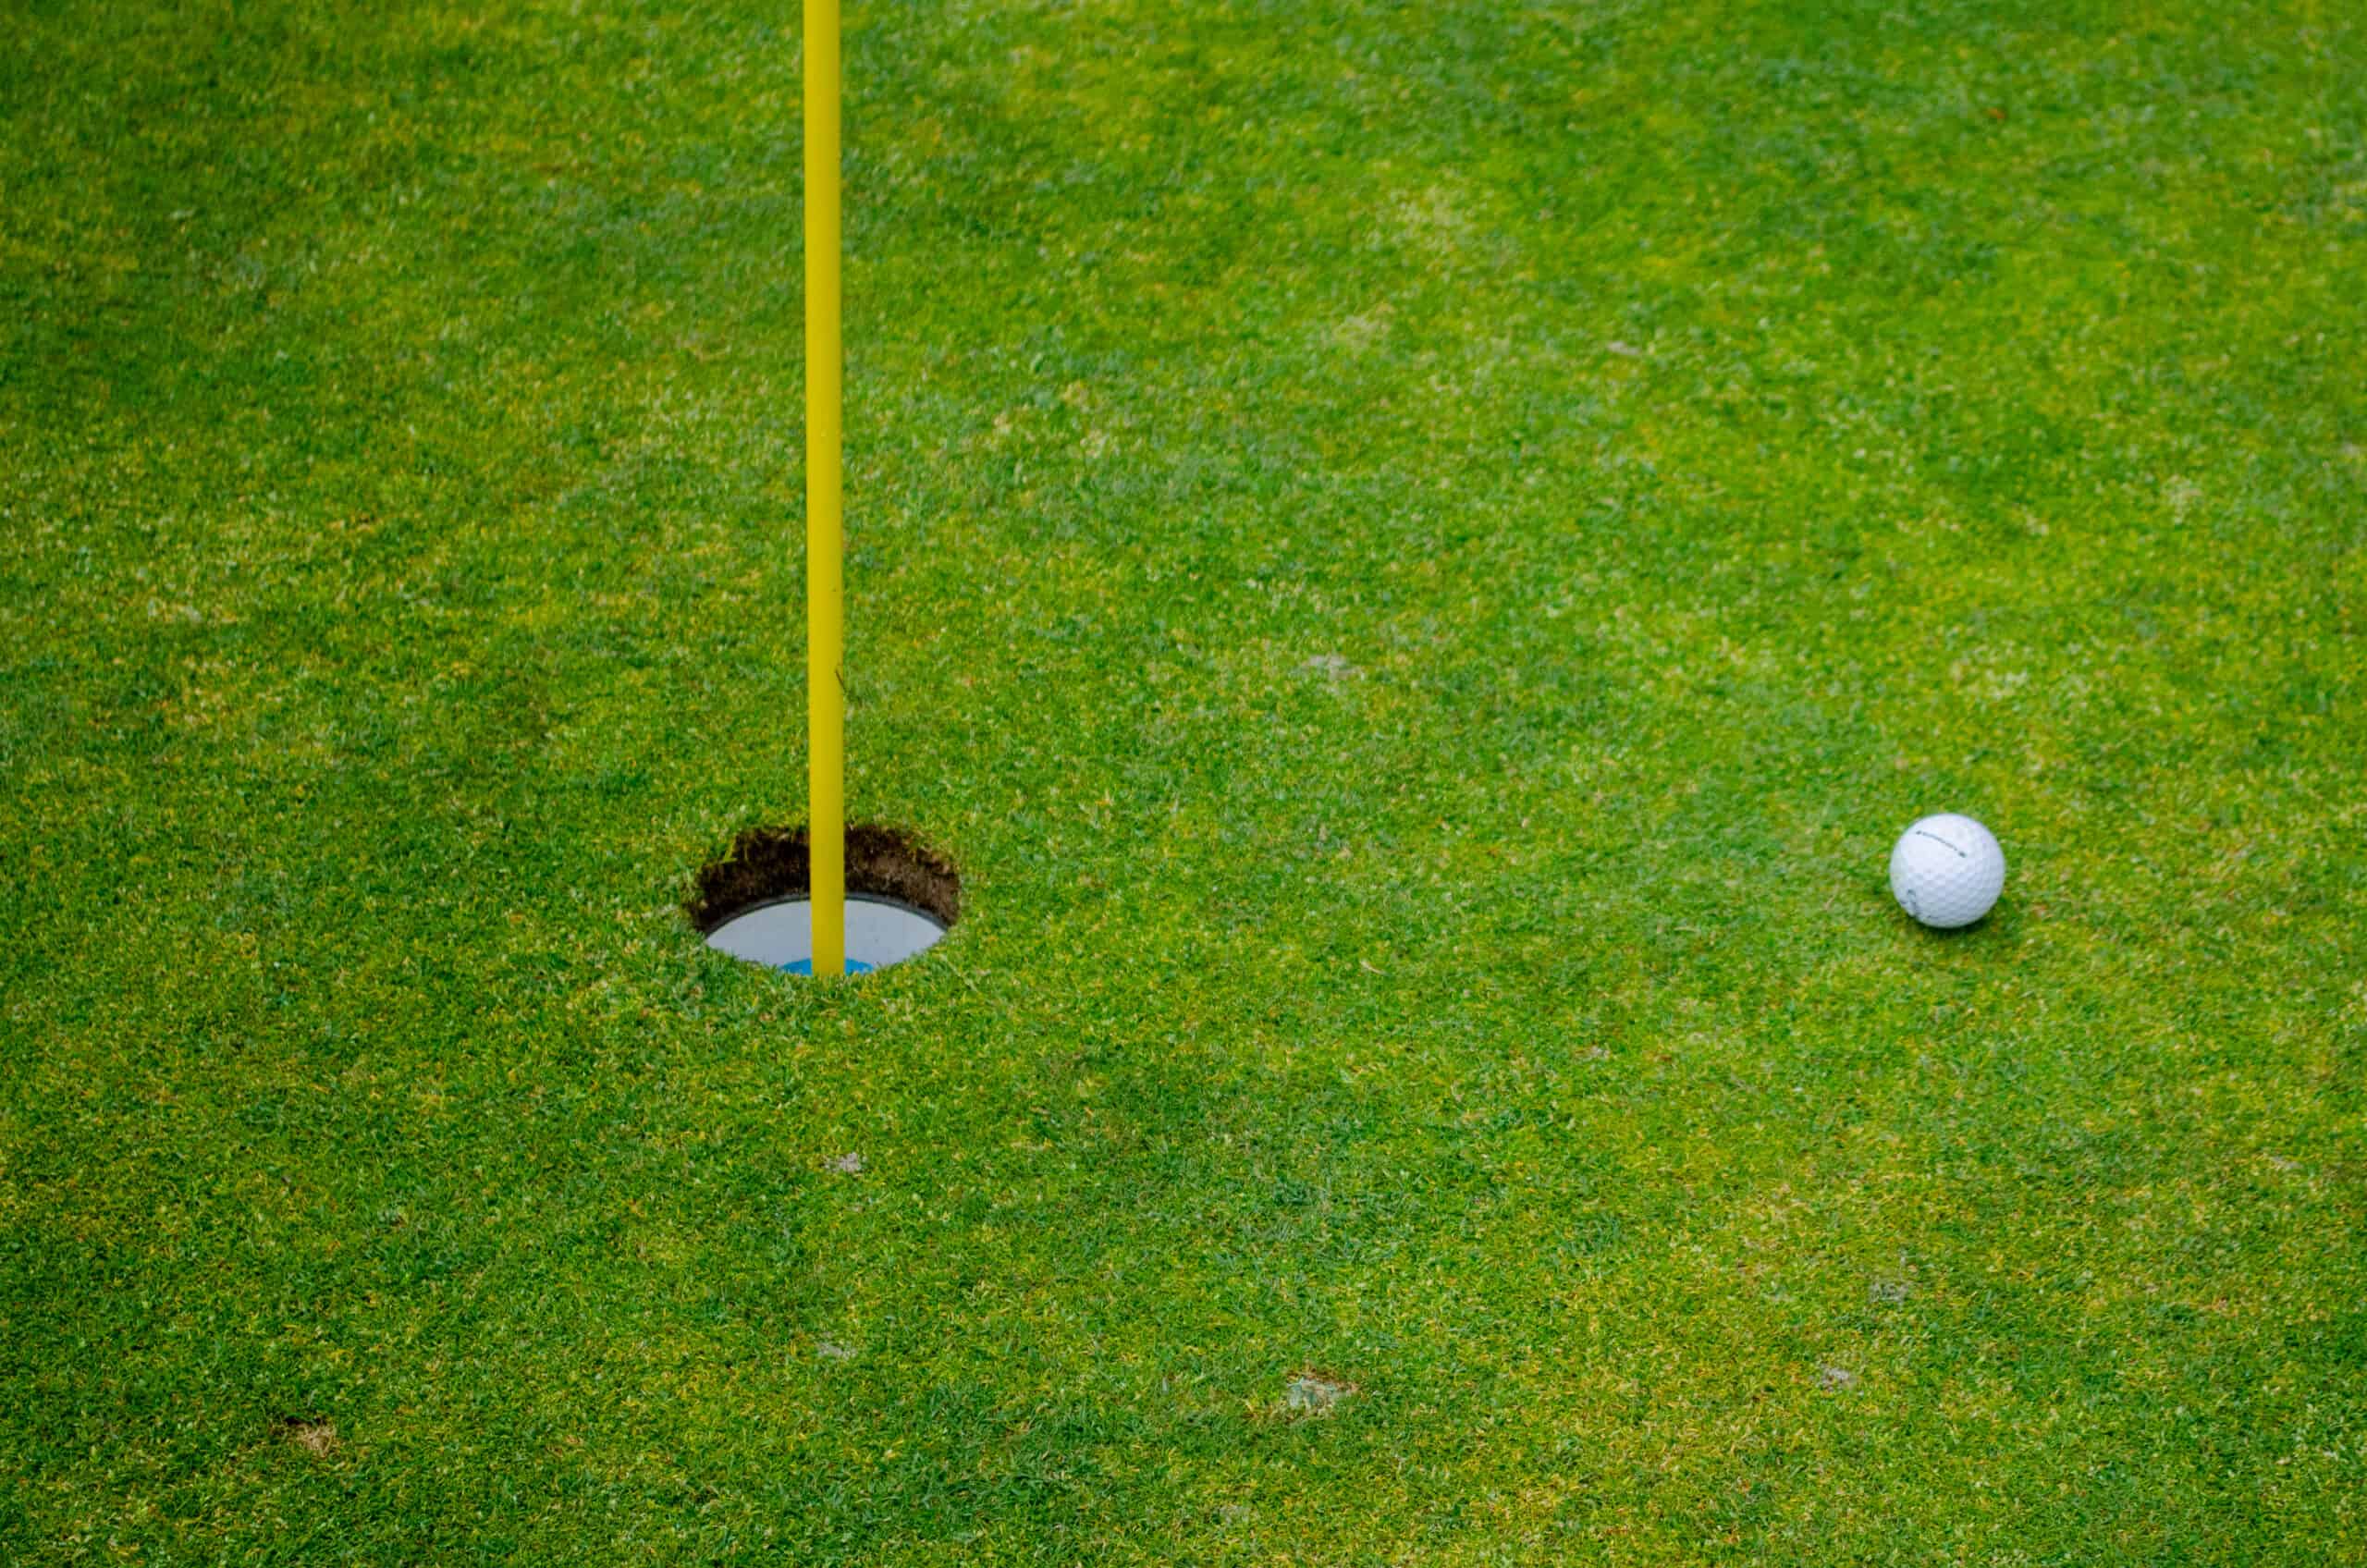 Can You Switch Golf Balls on the Green? Rules, Penalties, and Exceptions Explained